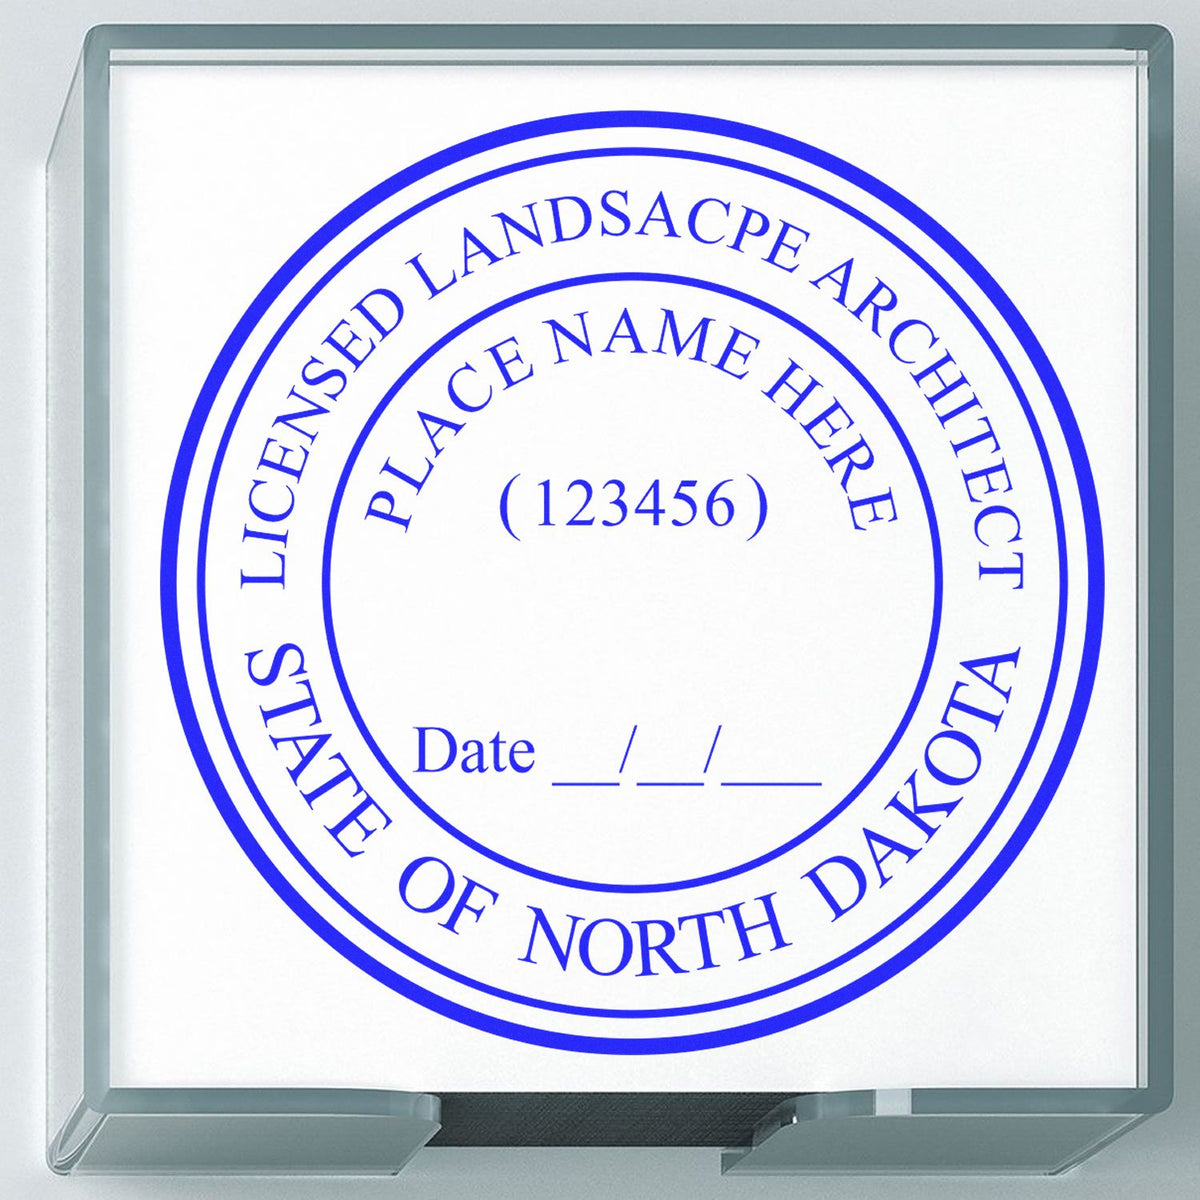 The Slim Pre-Inked North Dakota Landscape Architect Seal Stamp stamp impression comes to life with a crisp, detailed photo on paper - showcasing true professional quality.